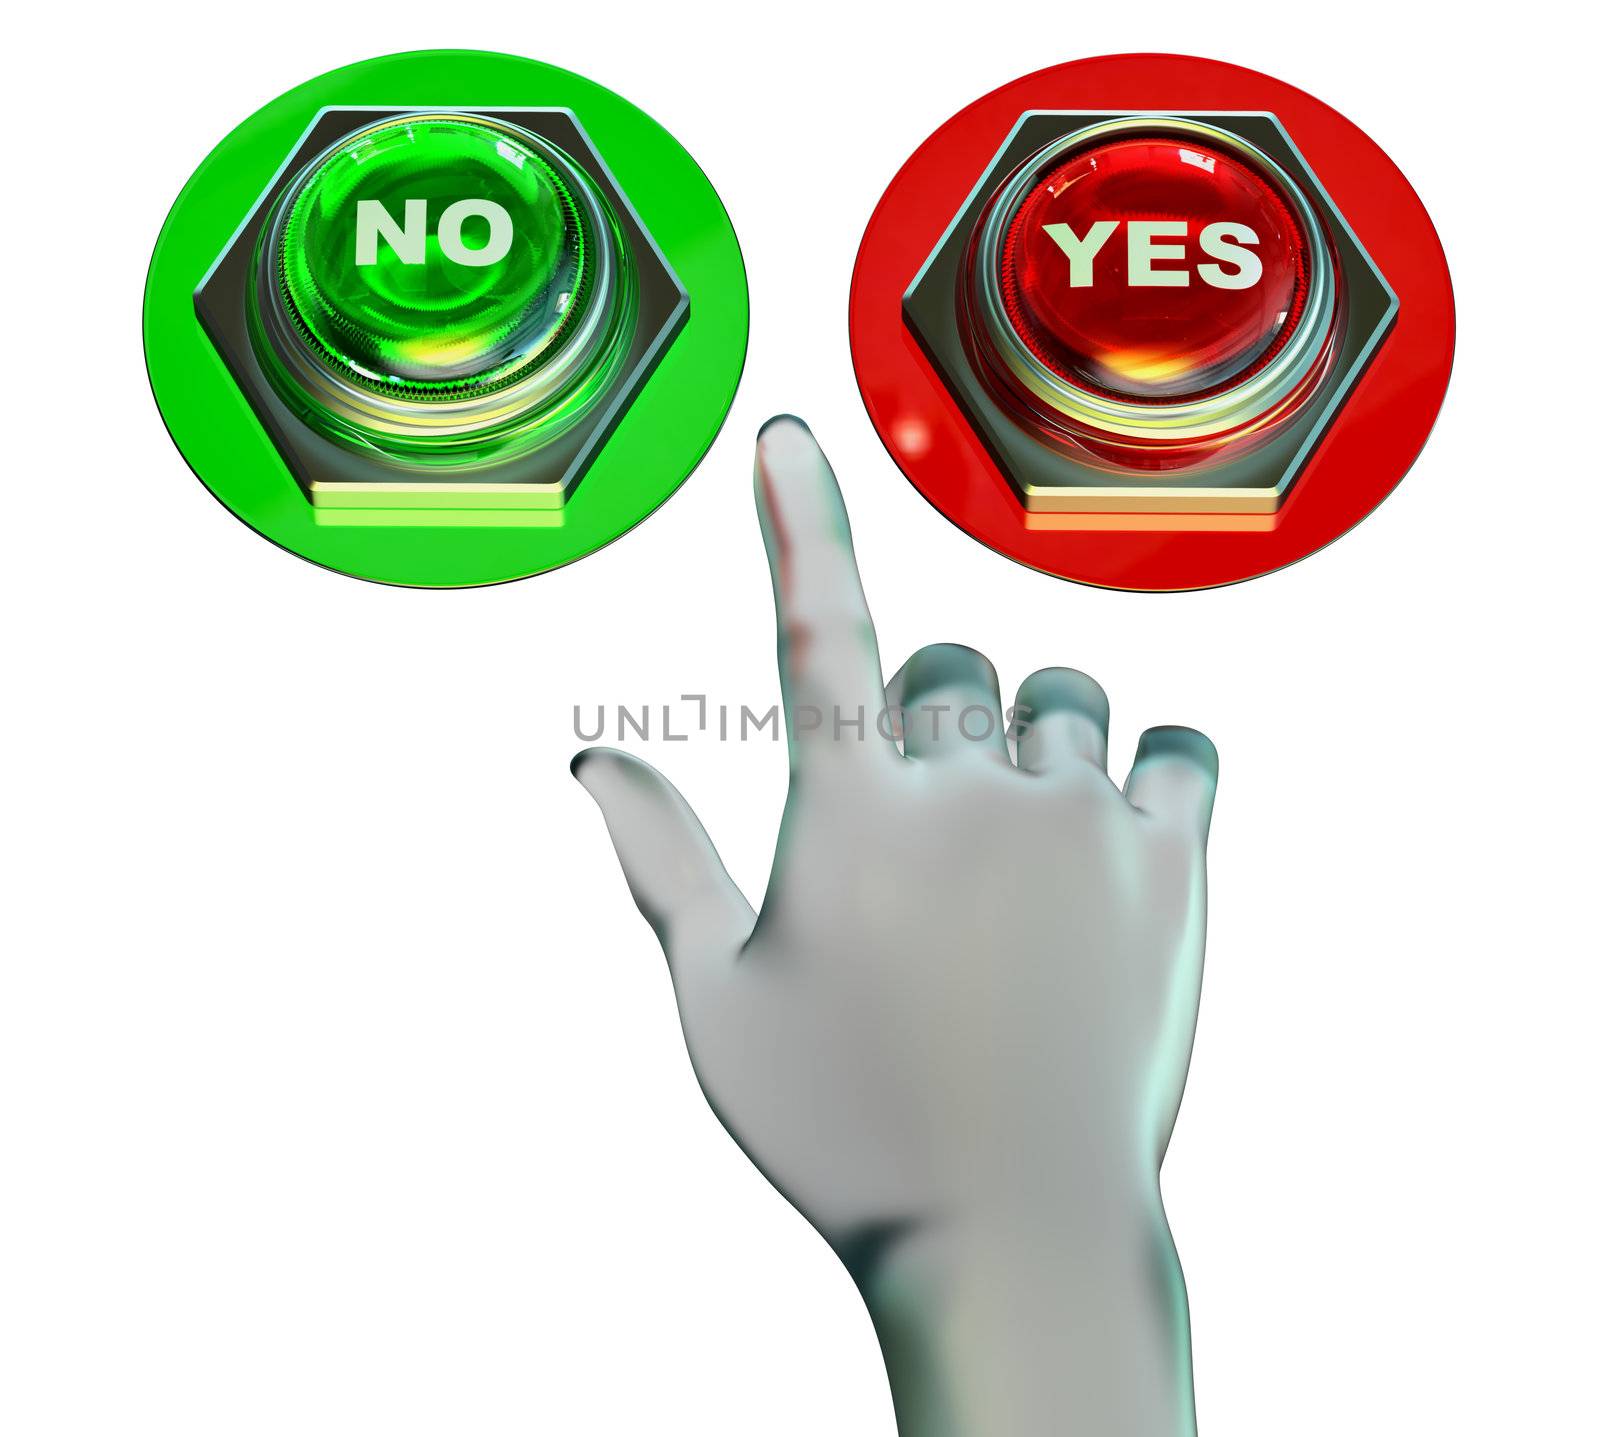 Yes and no buttons set for approved or rejected. Make the choice